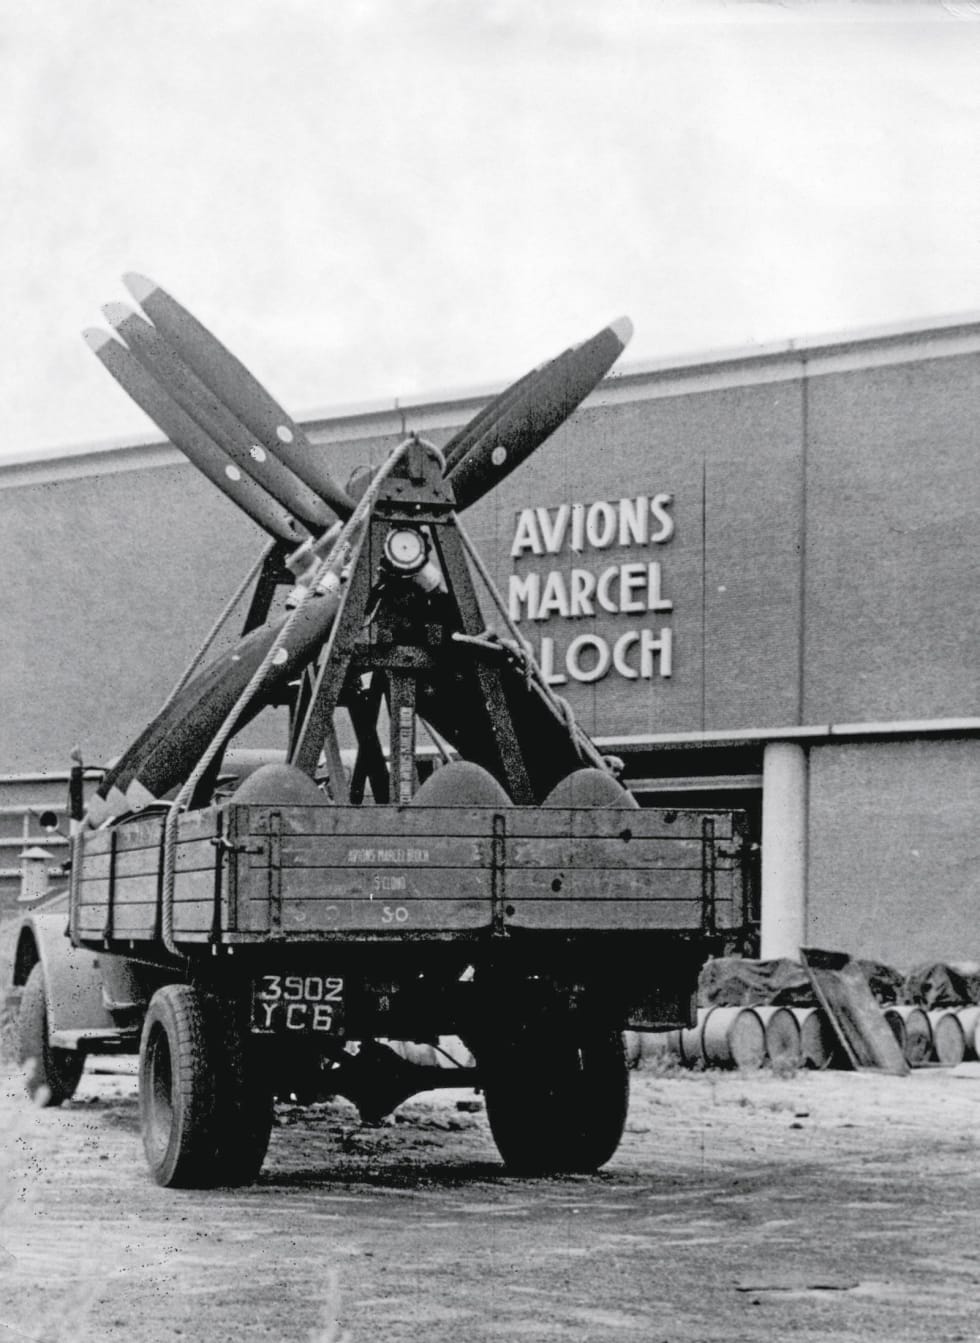 The Bloch plant in Saint-Cloud, built in 1938, made engines and propellers